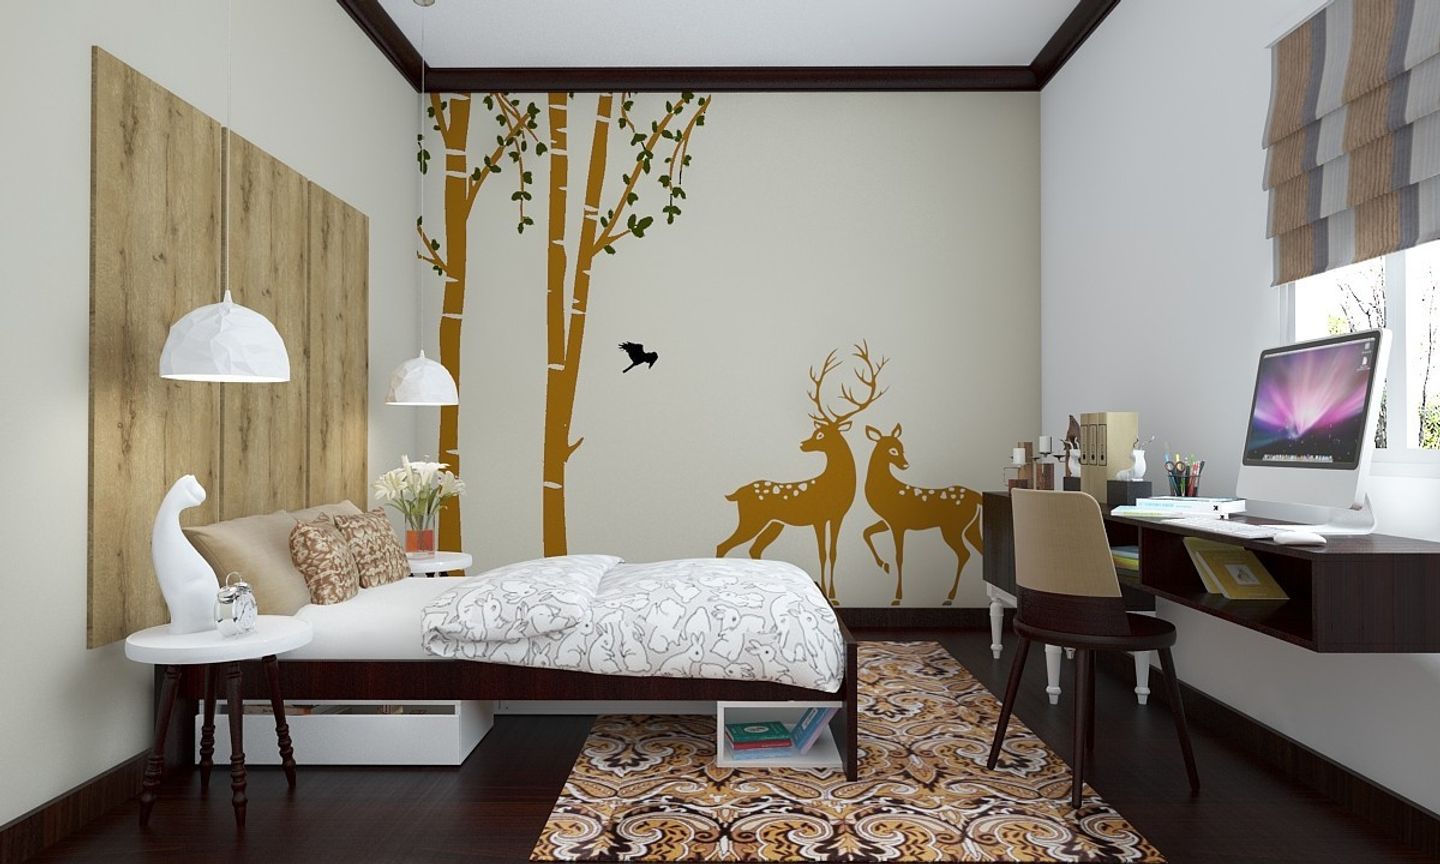 Modern Kid's Room Design With Wall Paint Design